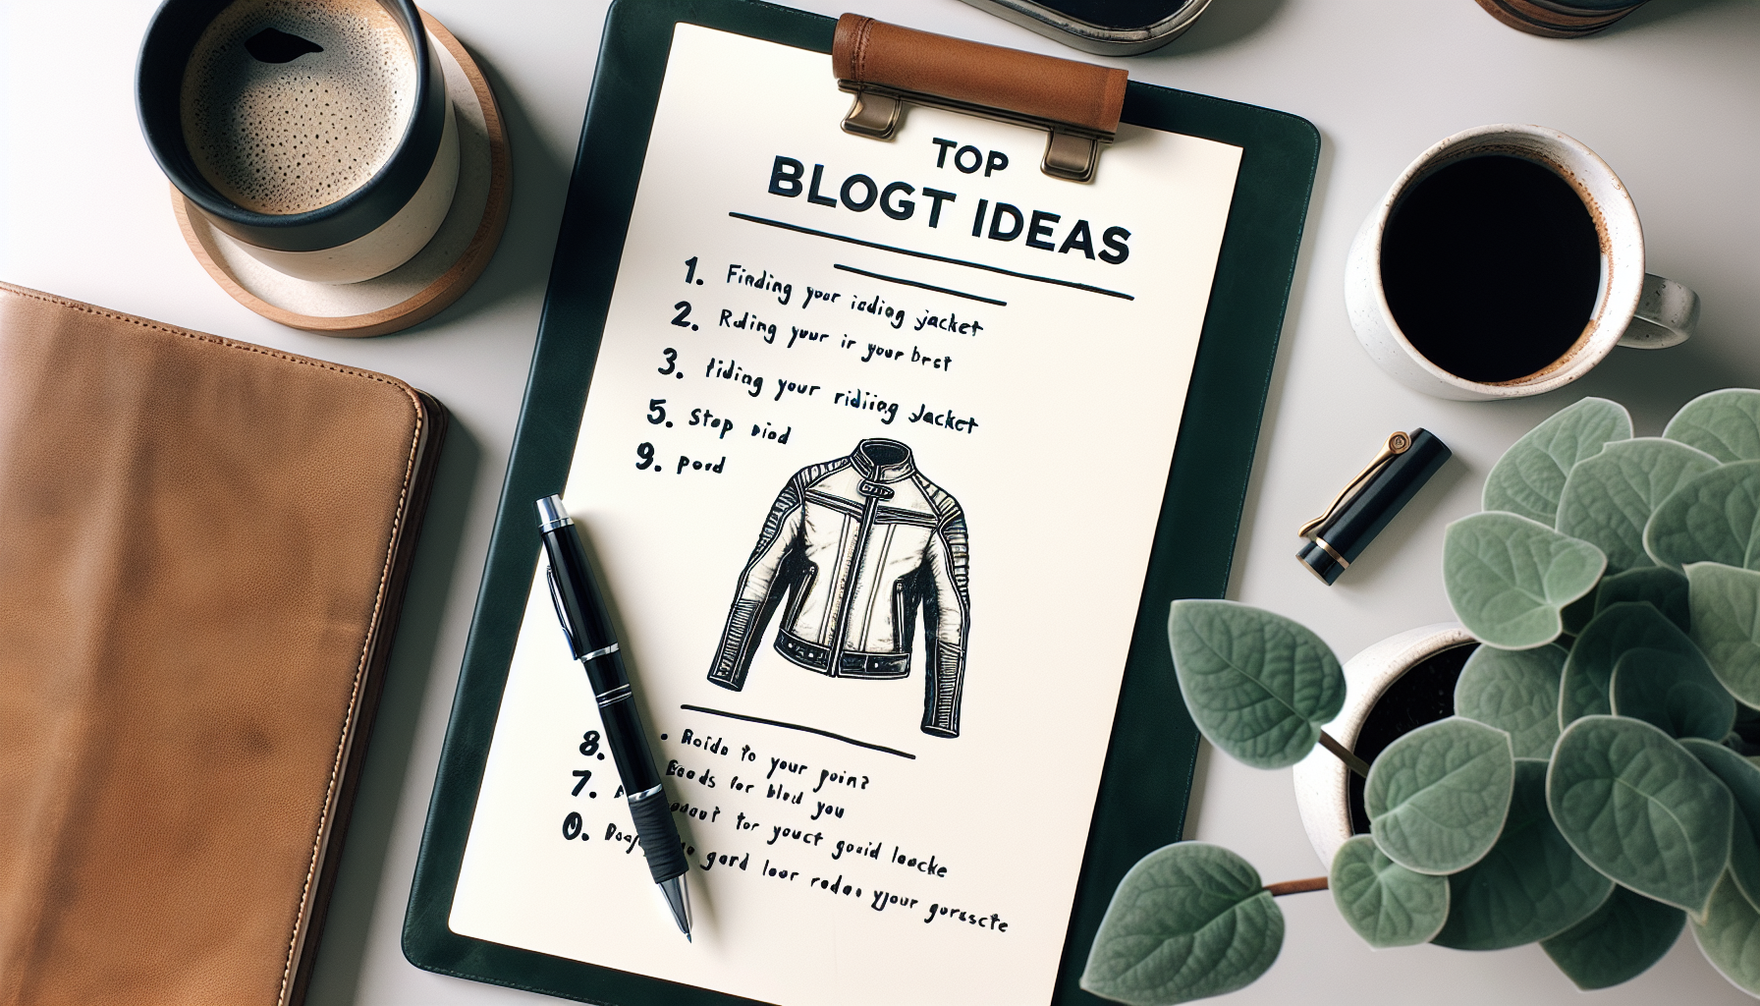 Image of a detailed checklist titled 'Top Blog Post Ideas' on a neat desktop setup. One of the points highlighted bold on the list is 'Finding Your Ideal Riding Jacket'. Surrounding items include a cl